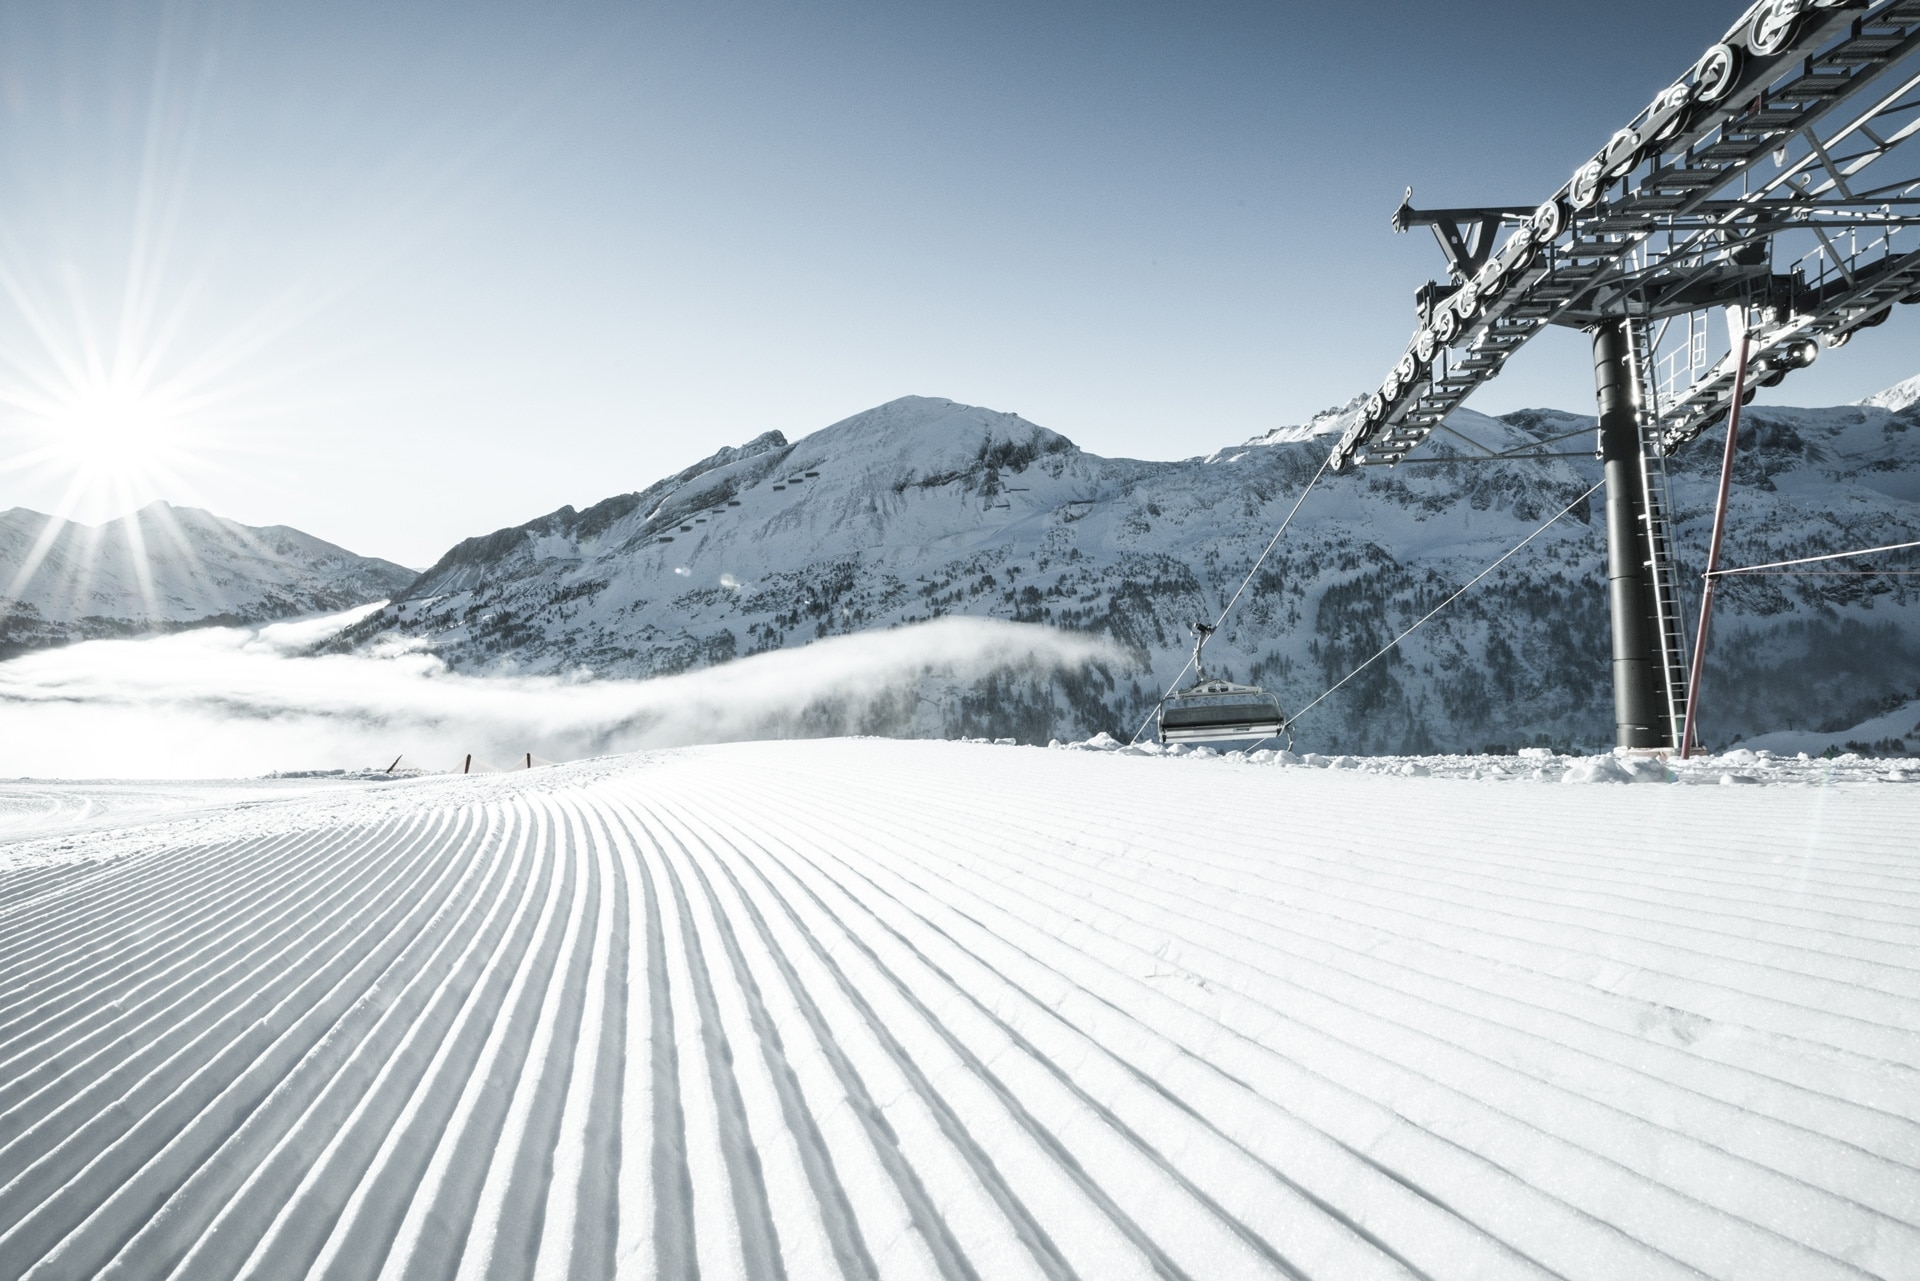 Sunrise over a pristine ski slope with freshly groomed tracks and a ski lift, set against a backdrop of majestic snow-covered mountains.